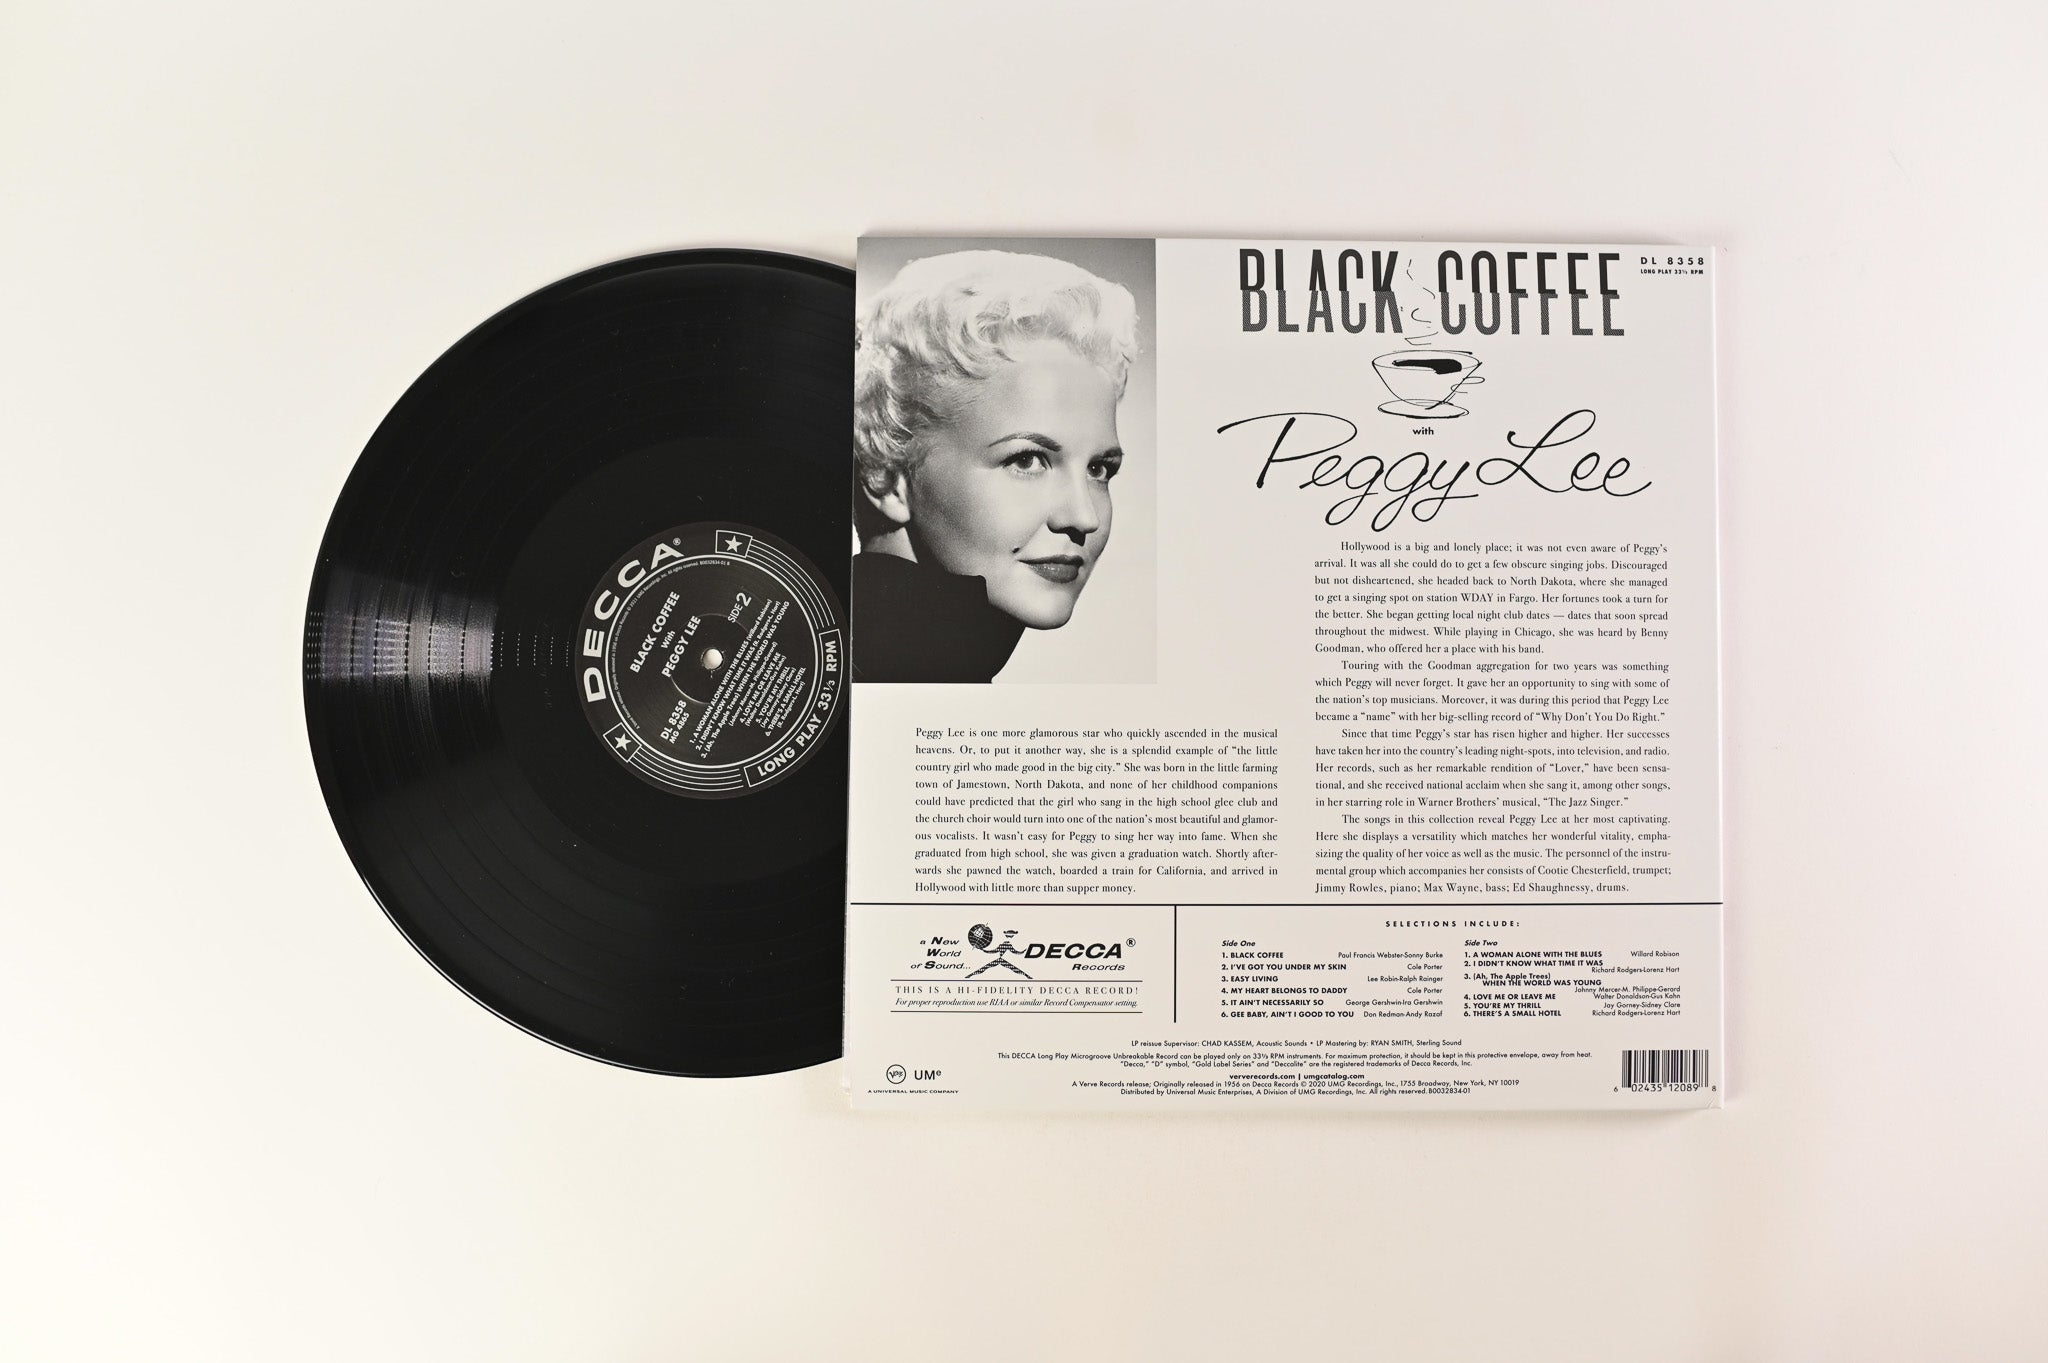 Peggy Lee - Black Coffee With Peggy Lee Reissue on Decca/Acoustic Sounds Series